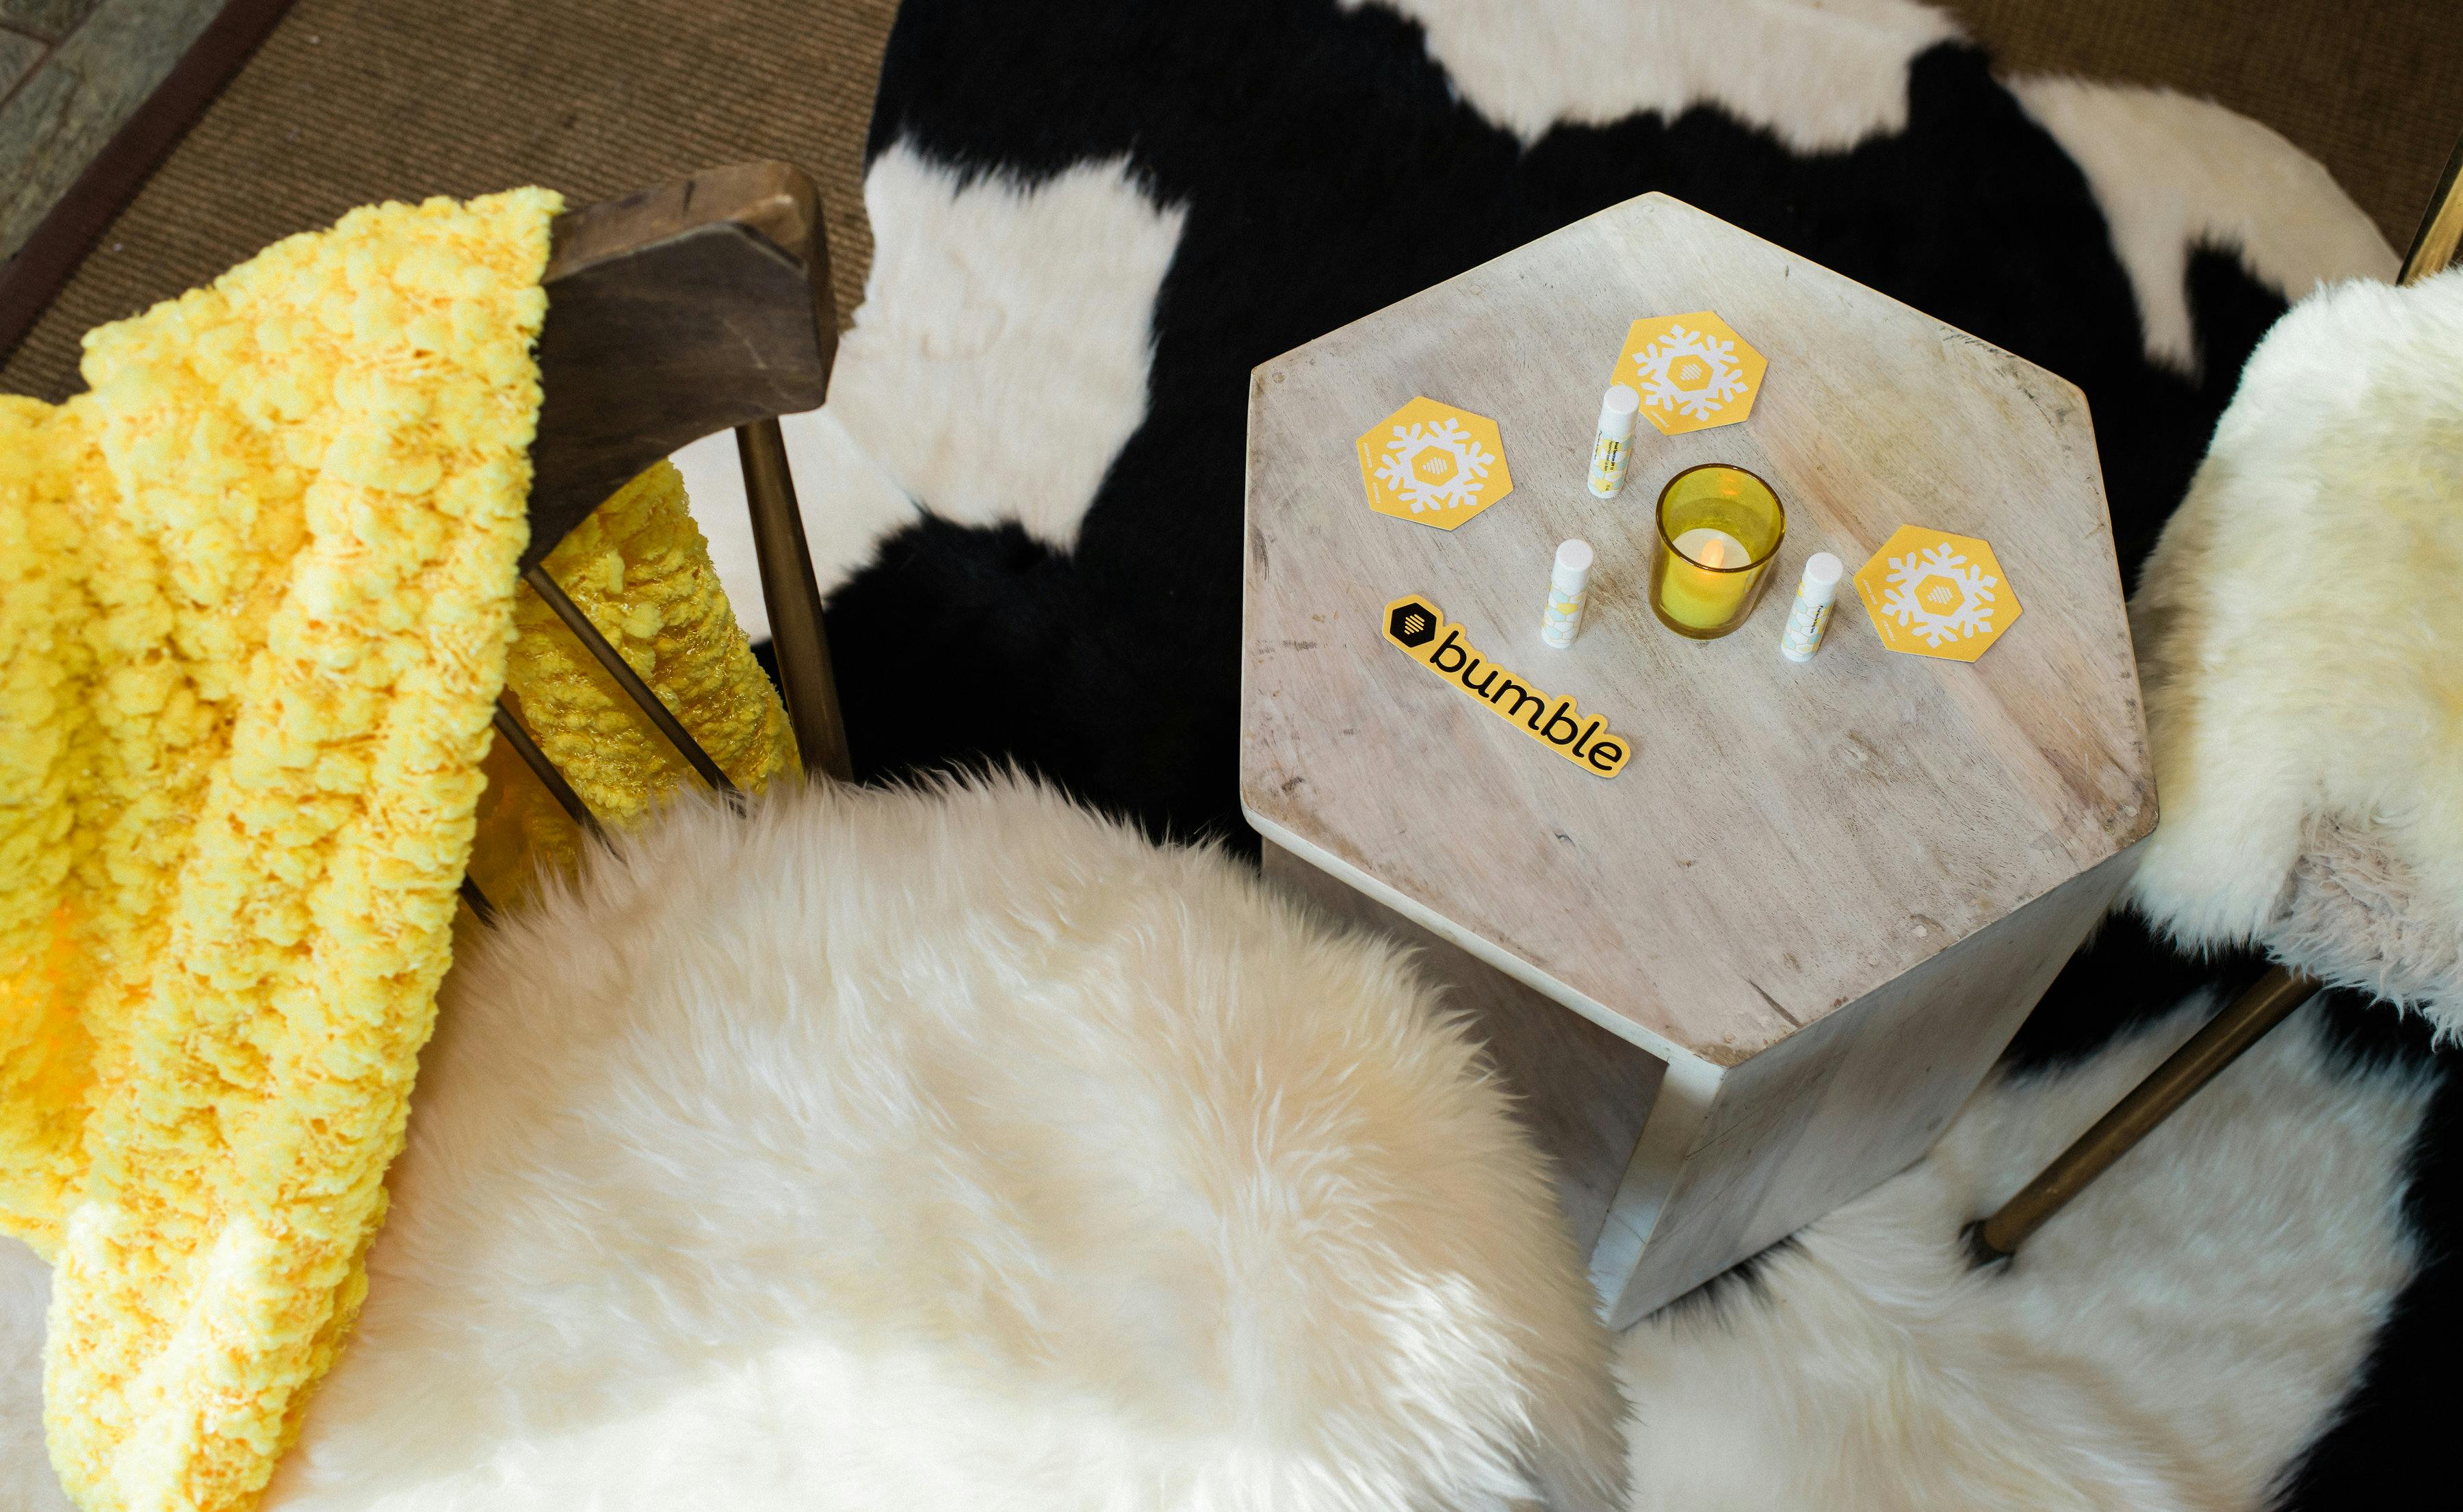 Aspen Winter Bumble brand party with honeycomb shape table | PartySlate